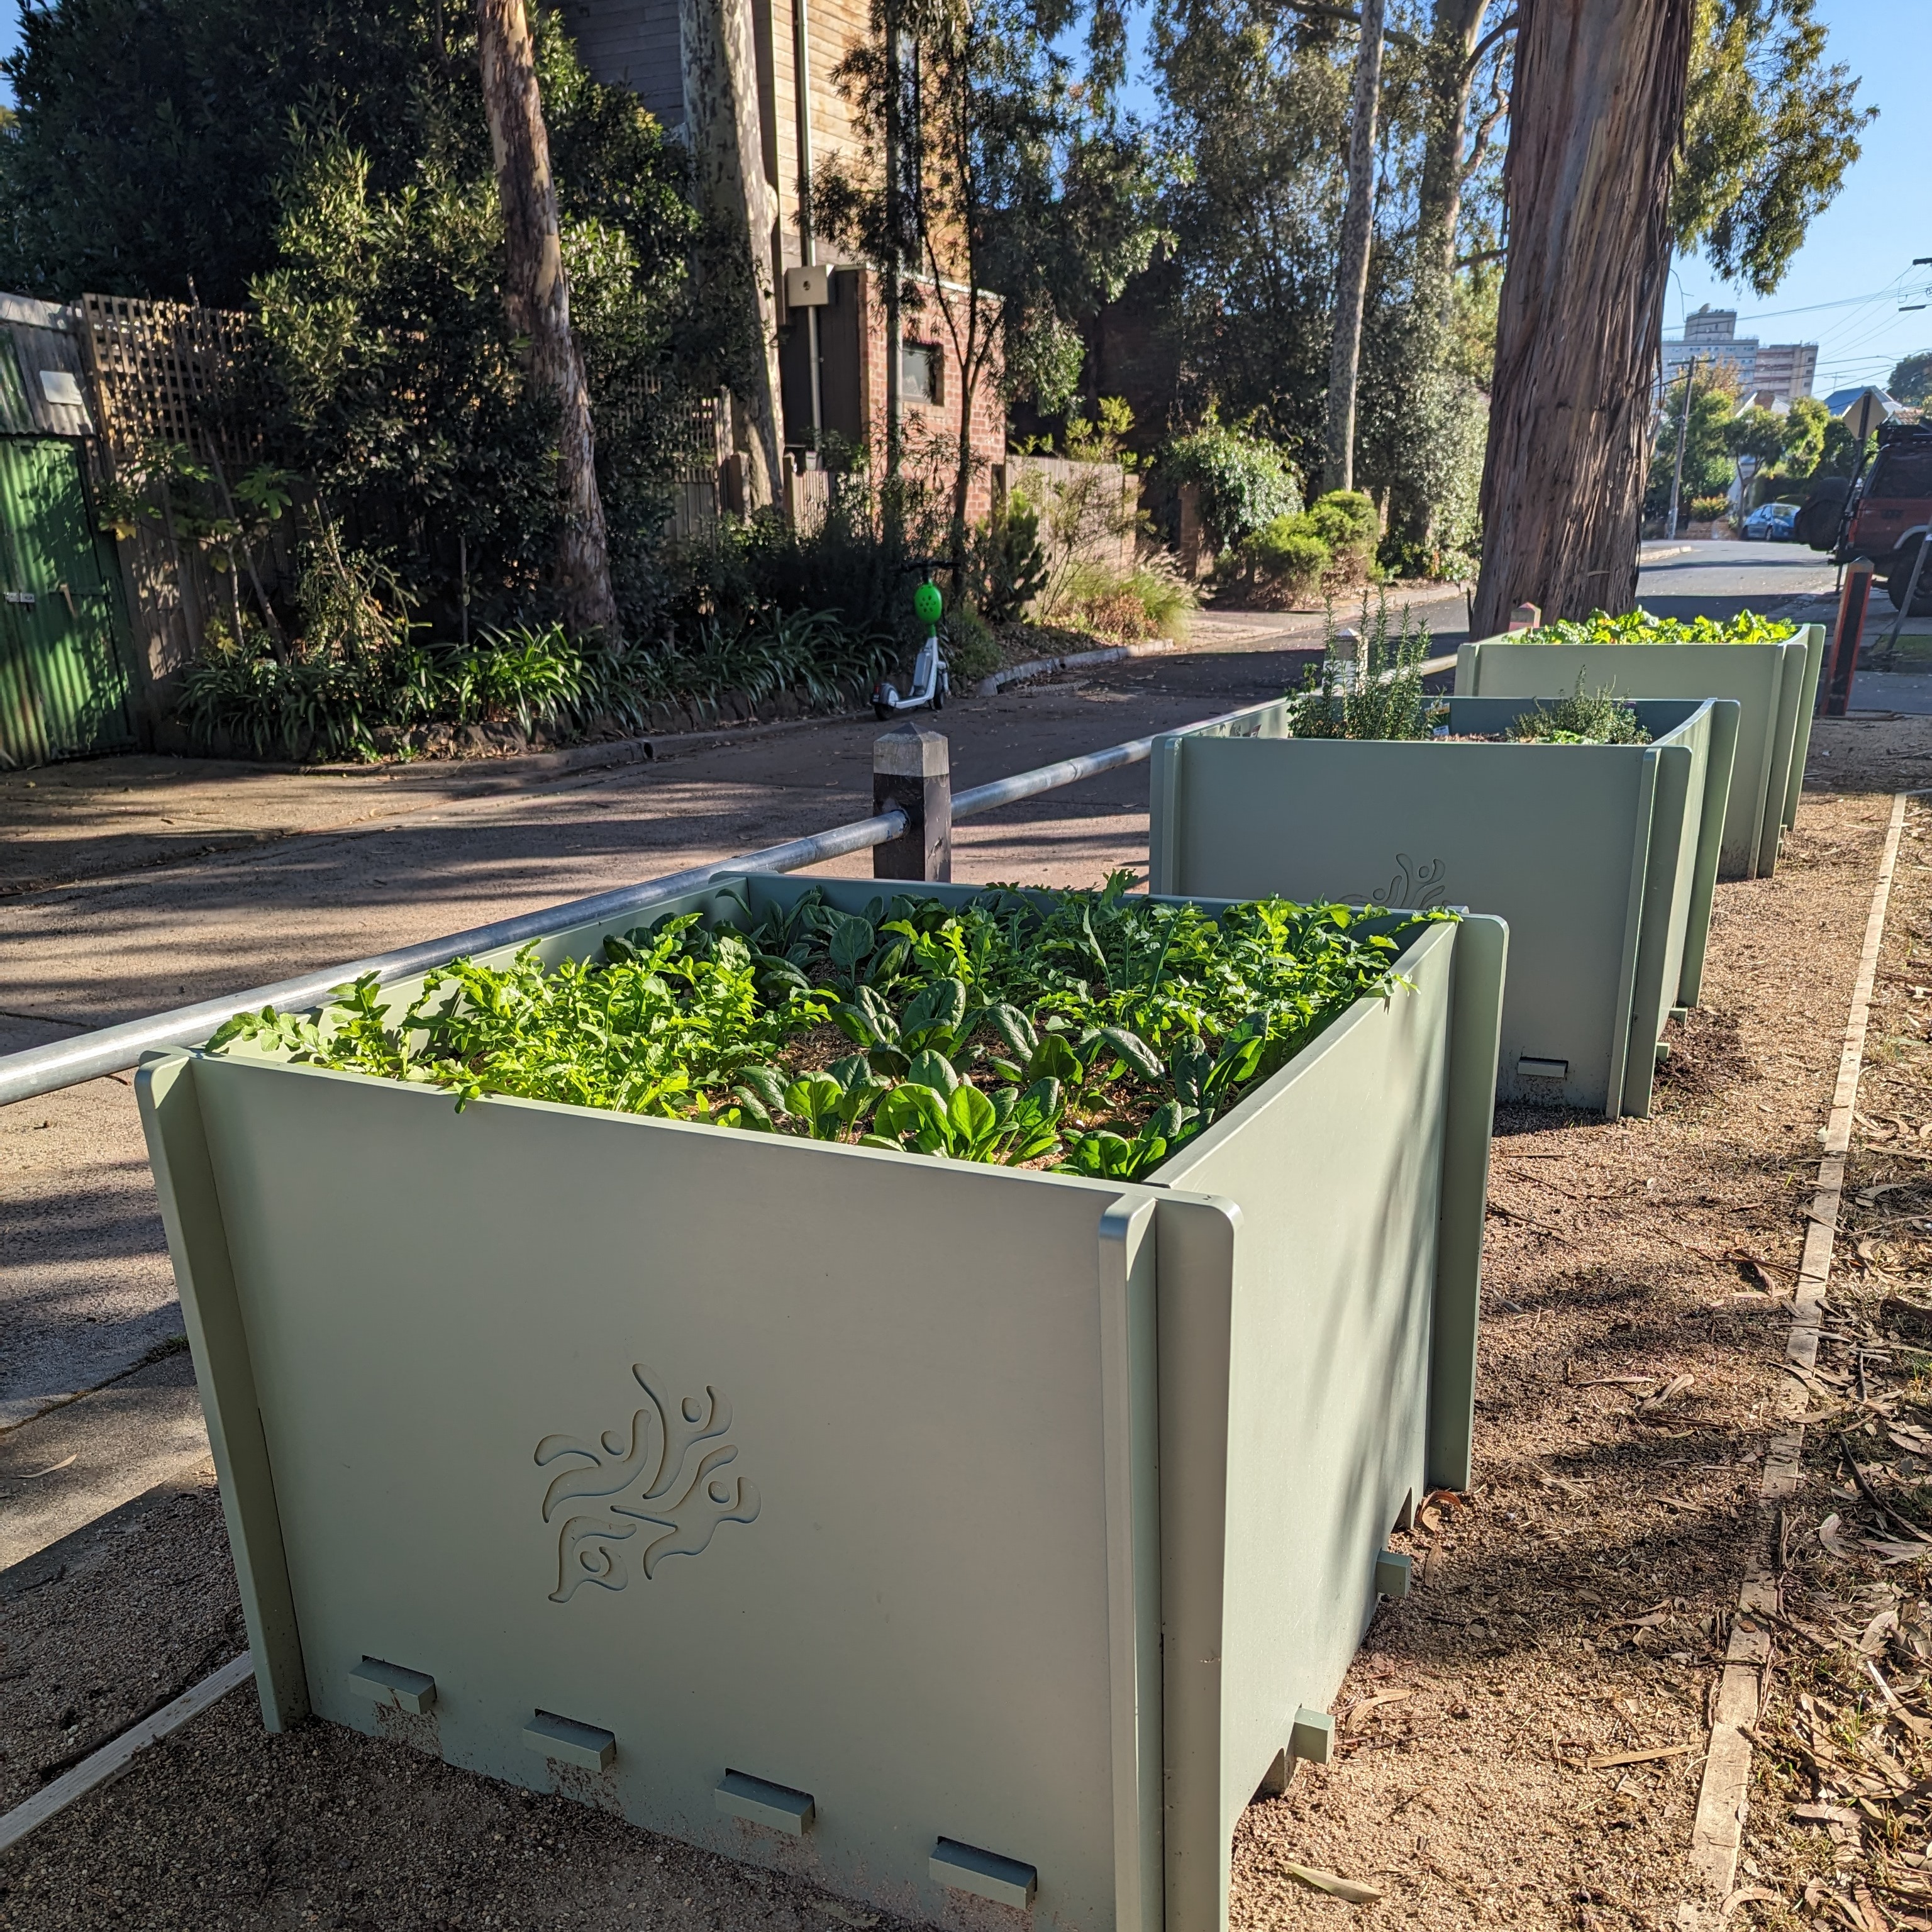 planter boxes with yarra city council branding along a walking track, with leafy greens growing in them. 